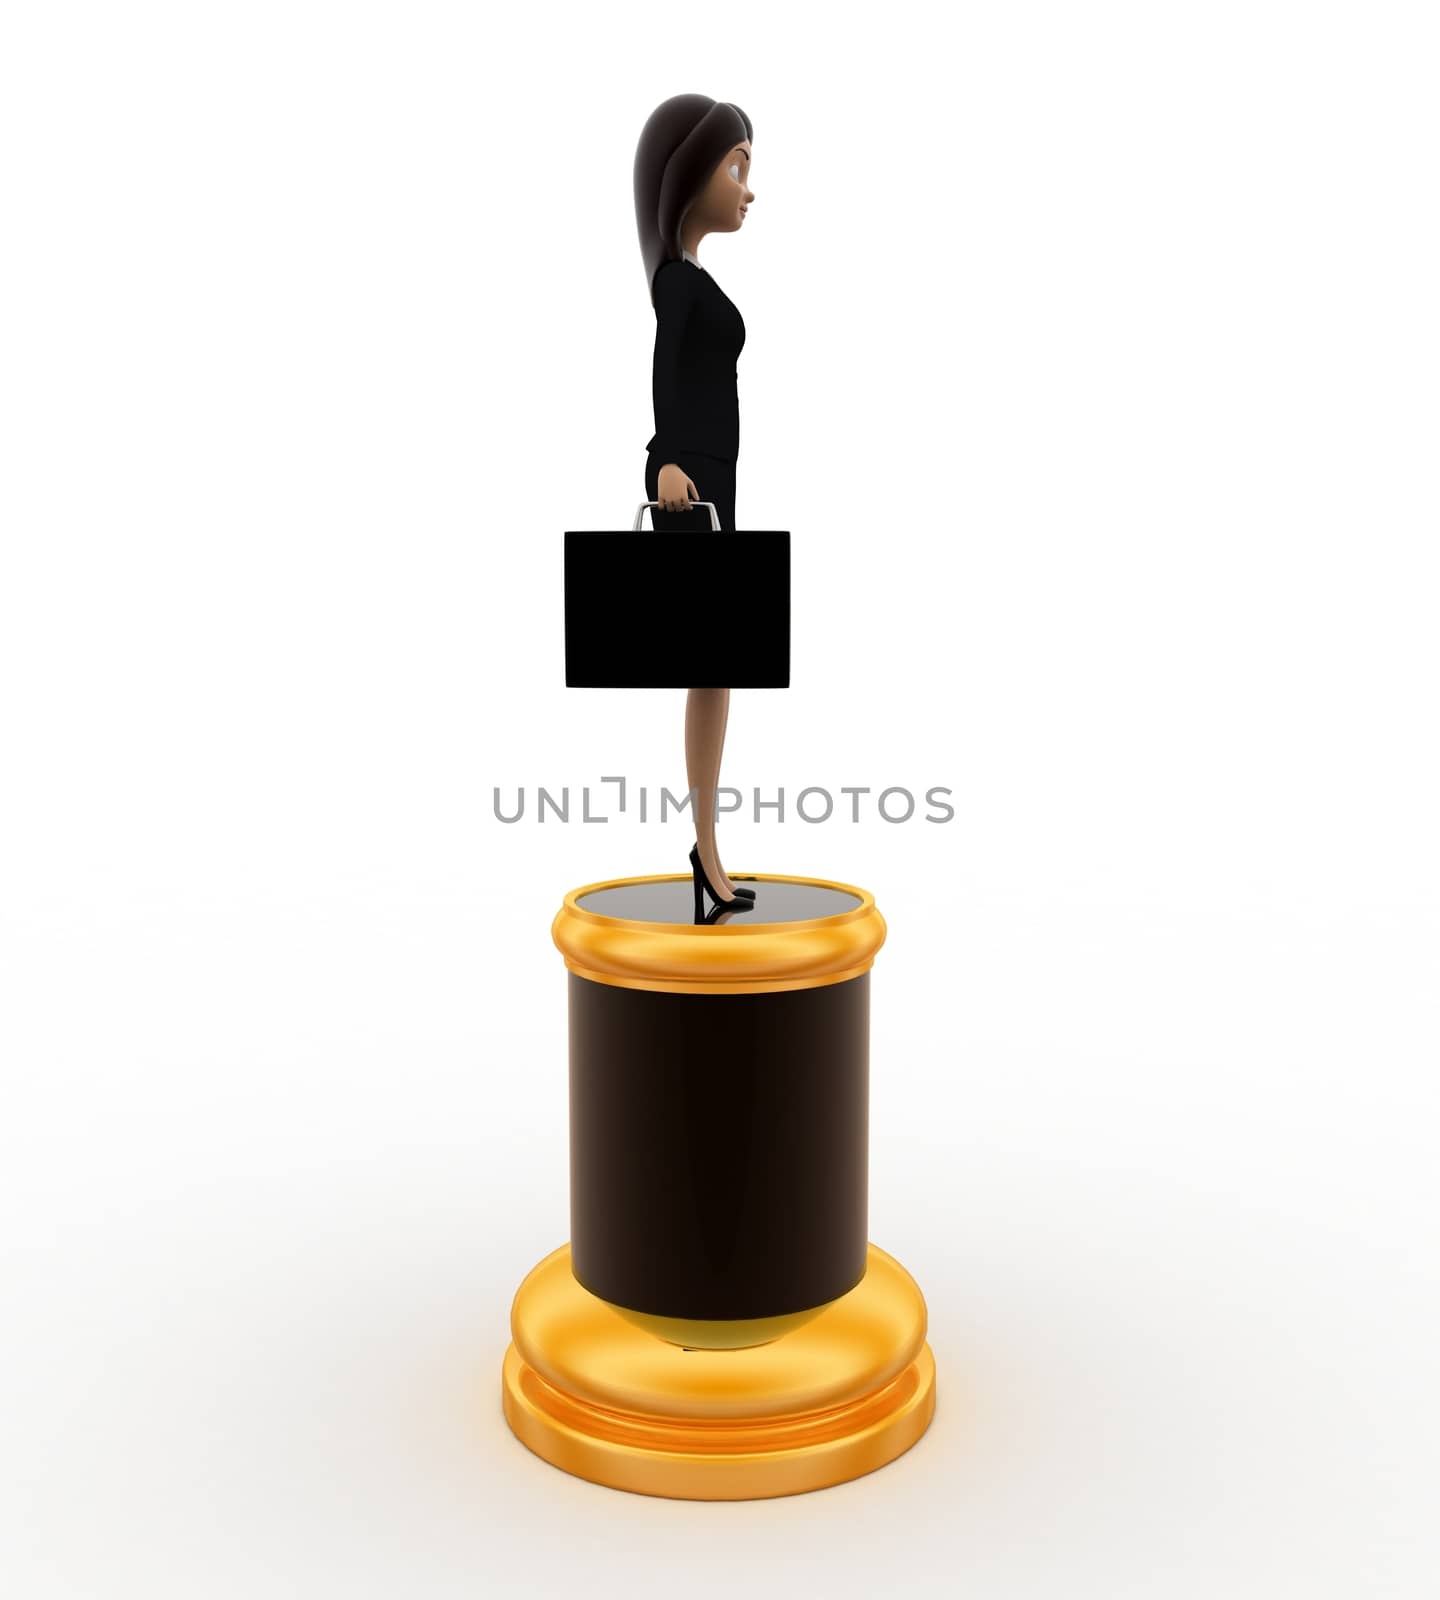 3d best employee award woman statue concept on white background, side angle view